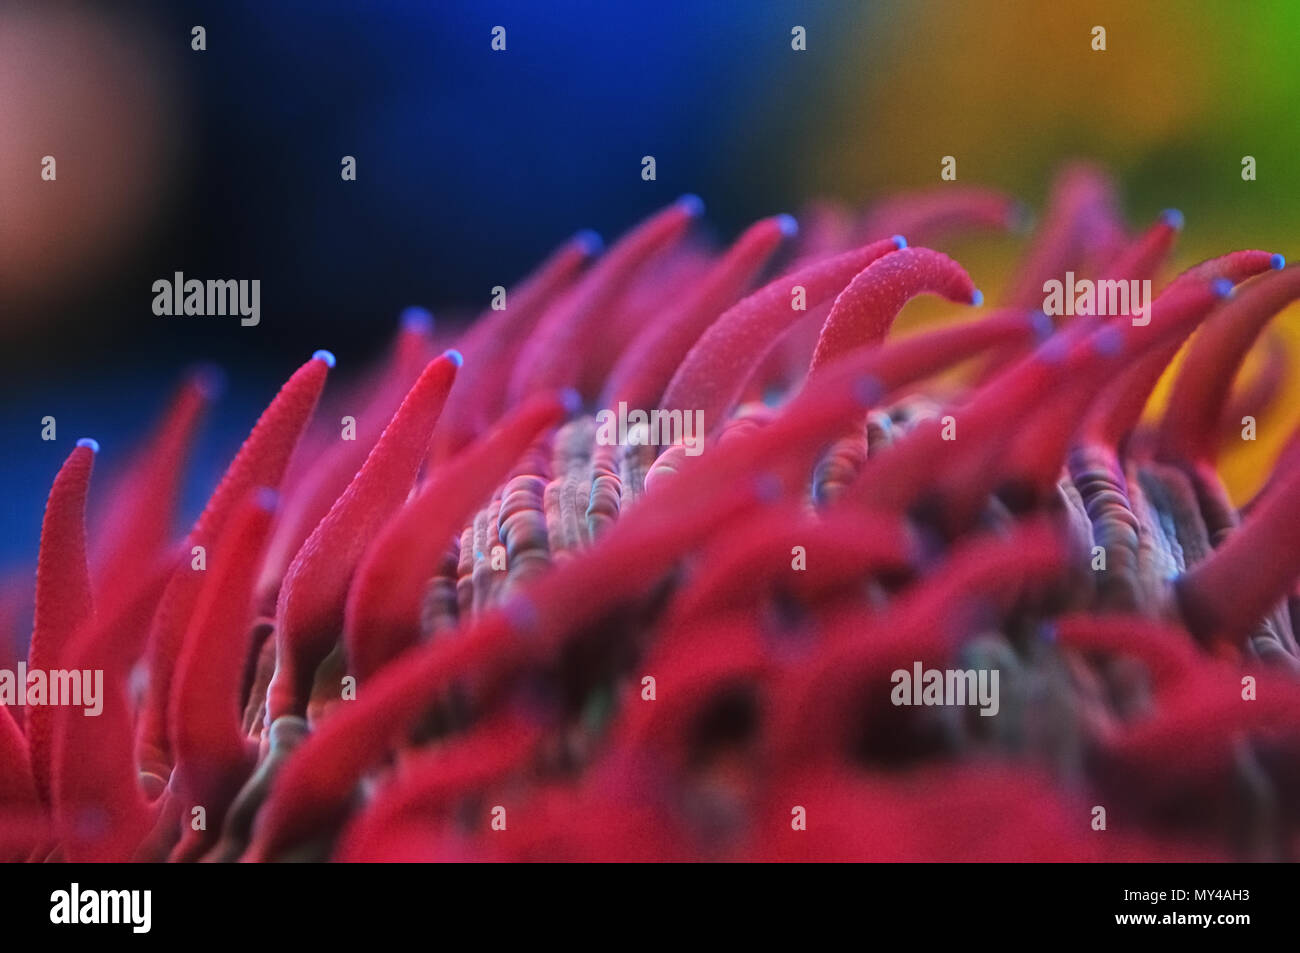 red and pink long tentacle plate coral Stock Photo